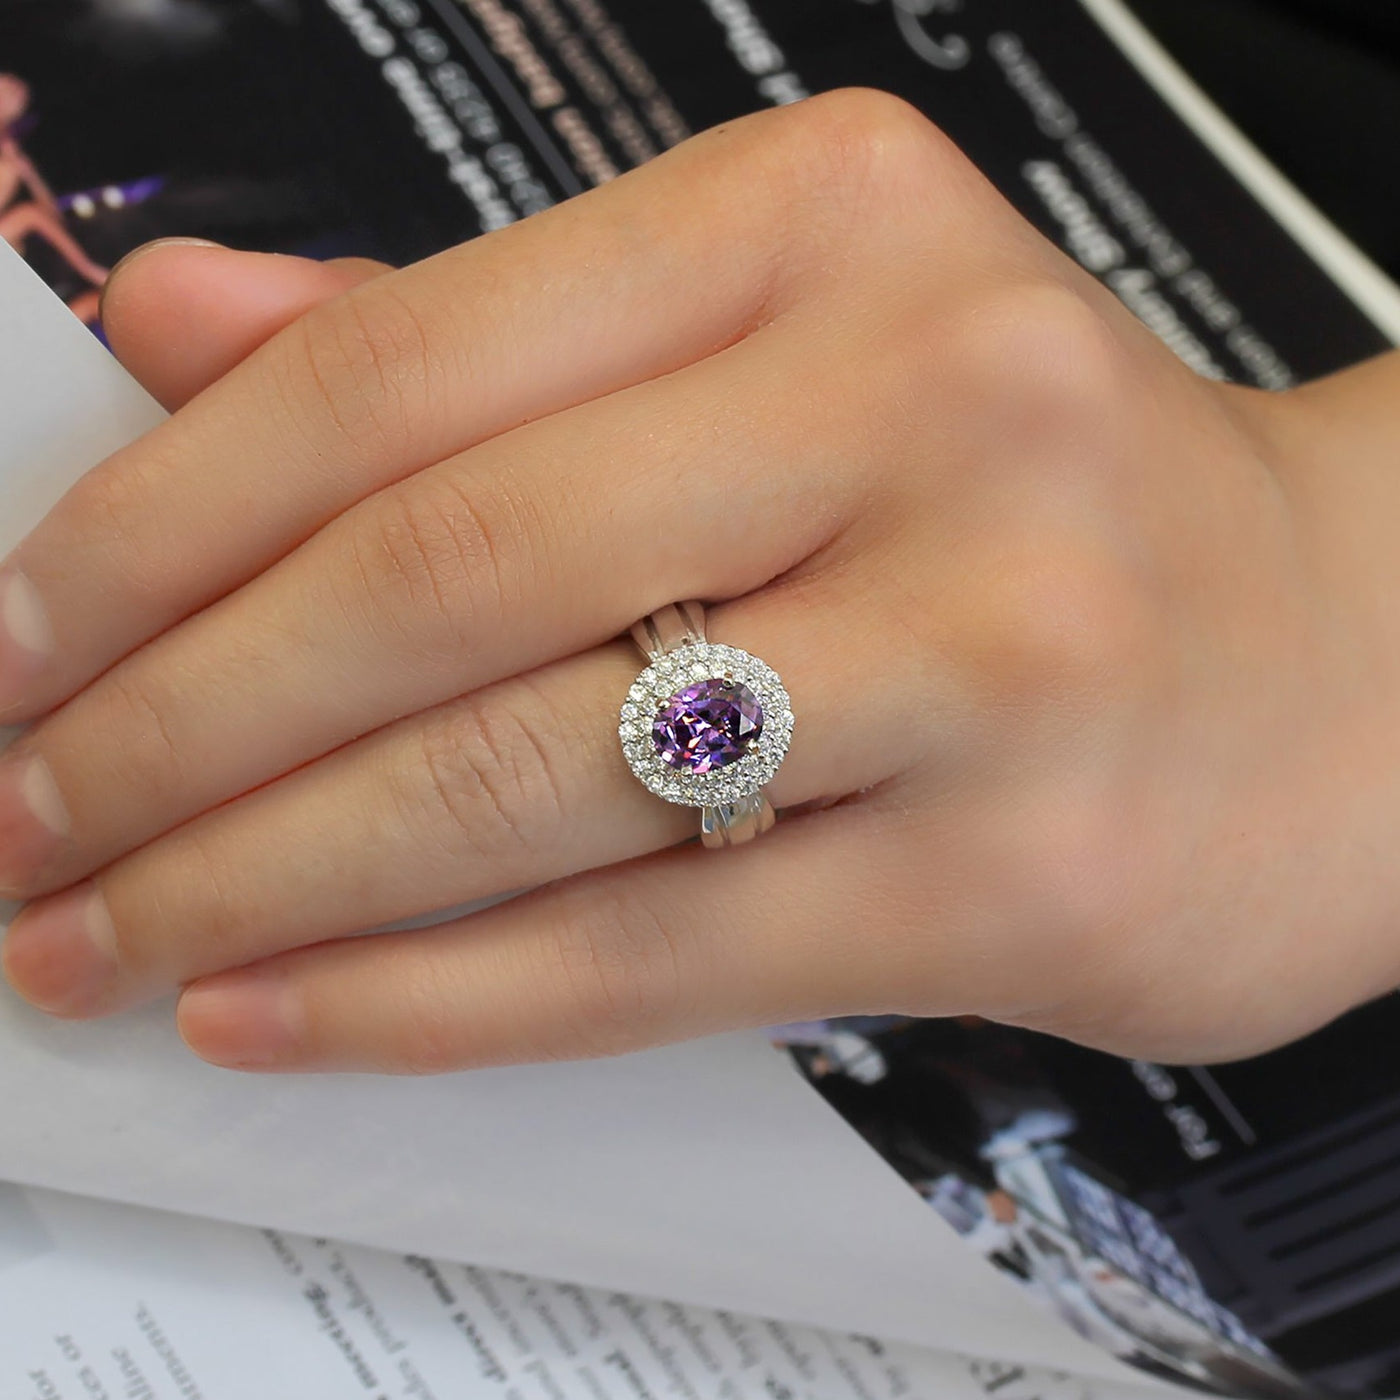 2 CT Oval Amethyst Color CZ Double Halo Ring